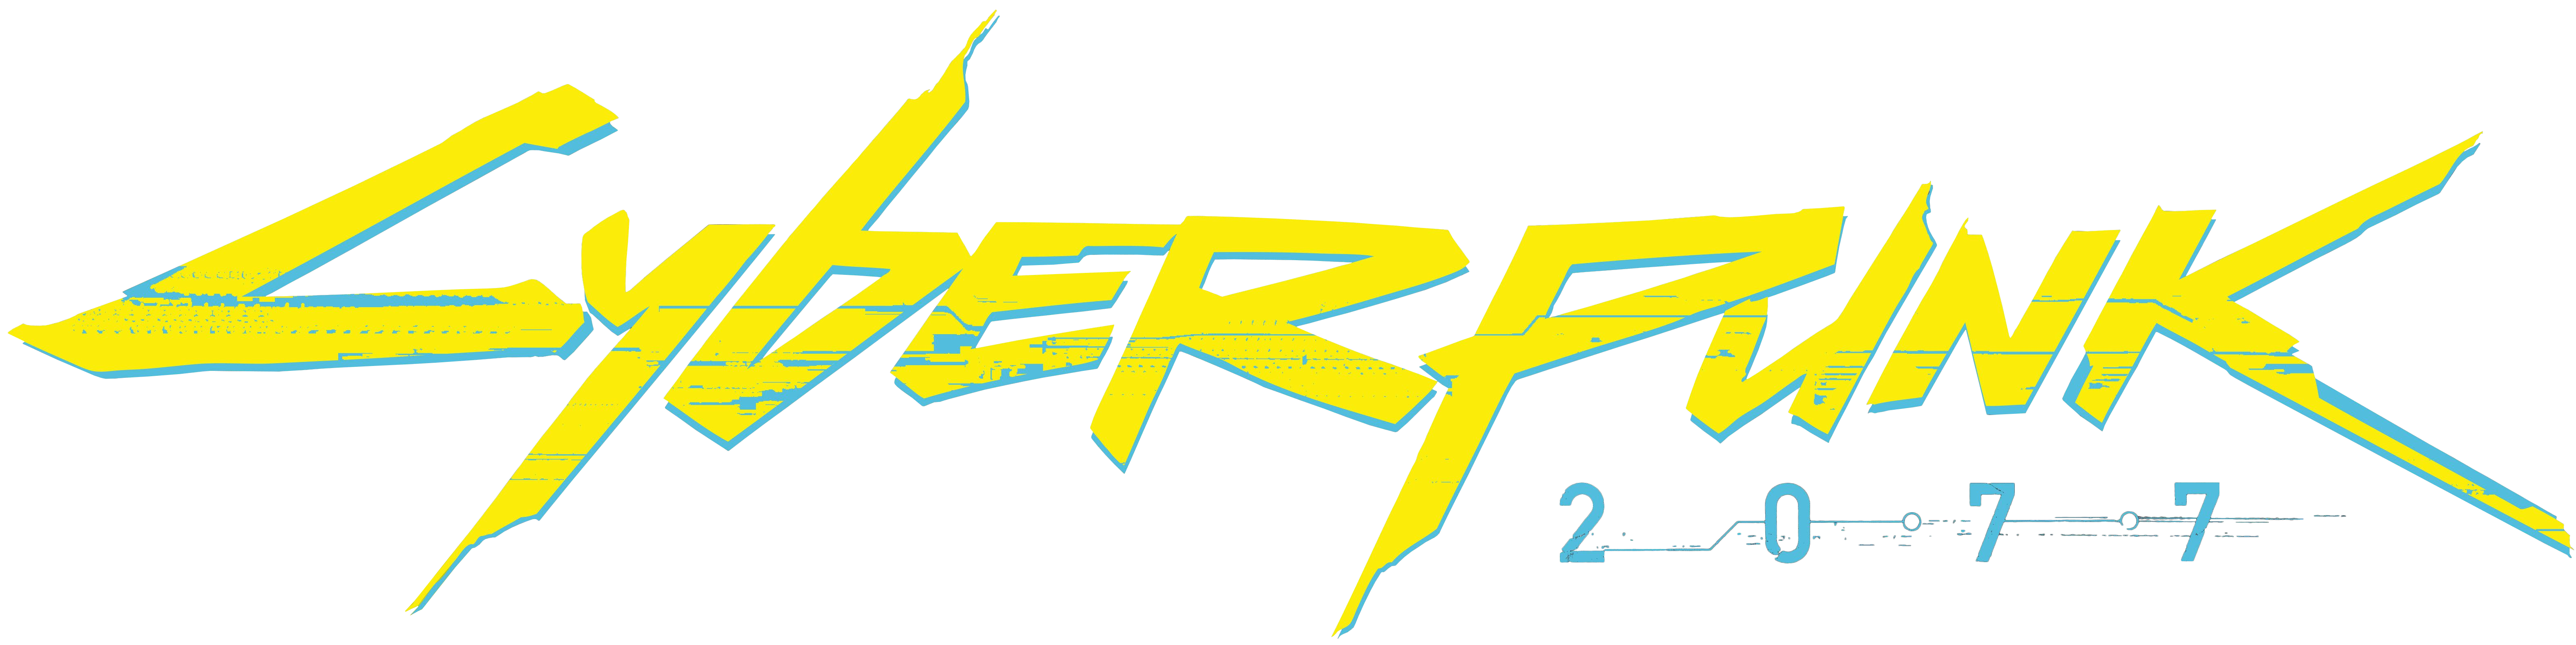 High Res Transparent Cyberpunk 2077 Logo Cut Out From The 14K